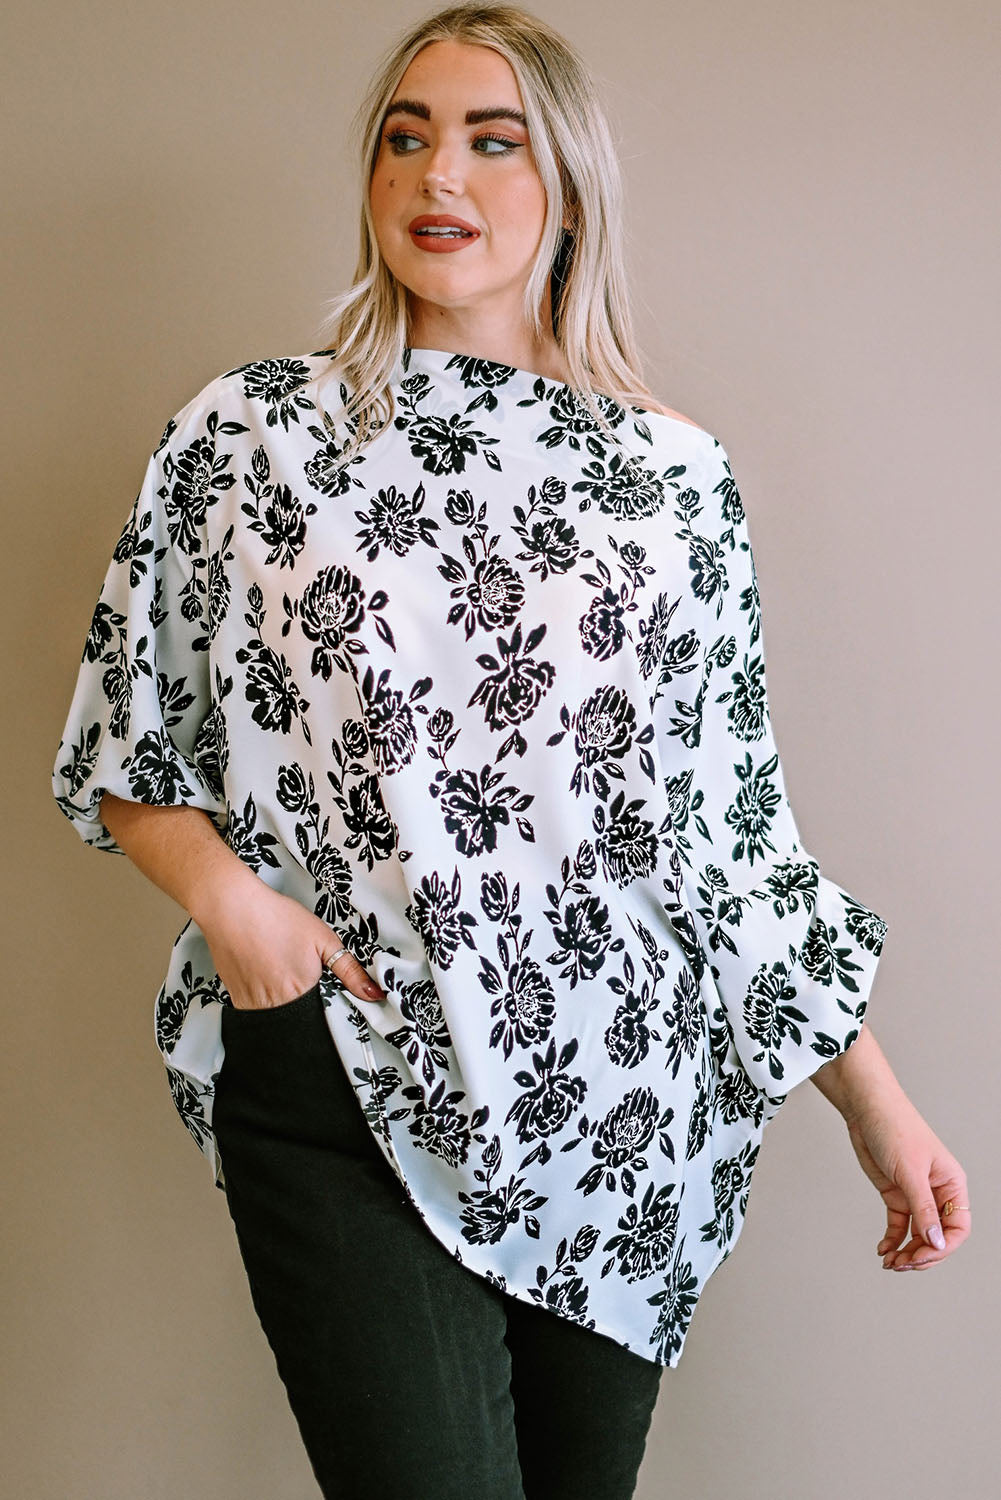 White Opposites Attract Boat Neck Floral Dolman Sleeve Top Plus Size Tops JT's Designer Fashion